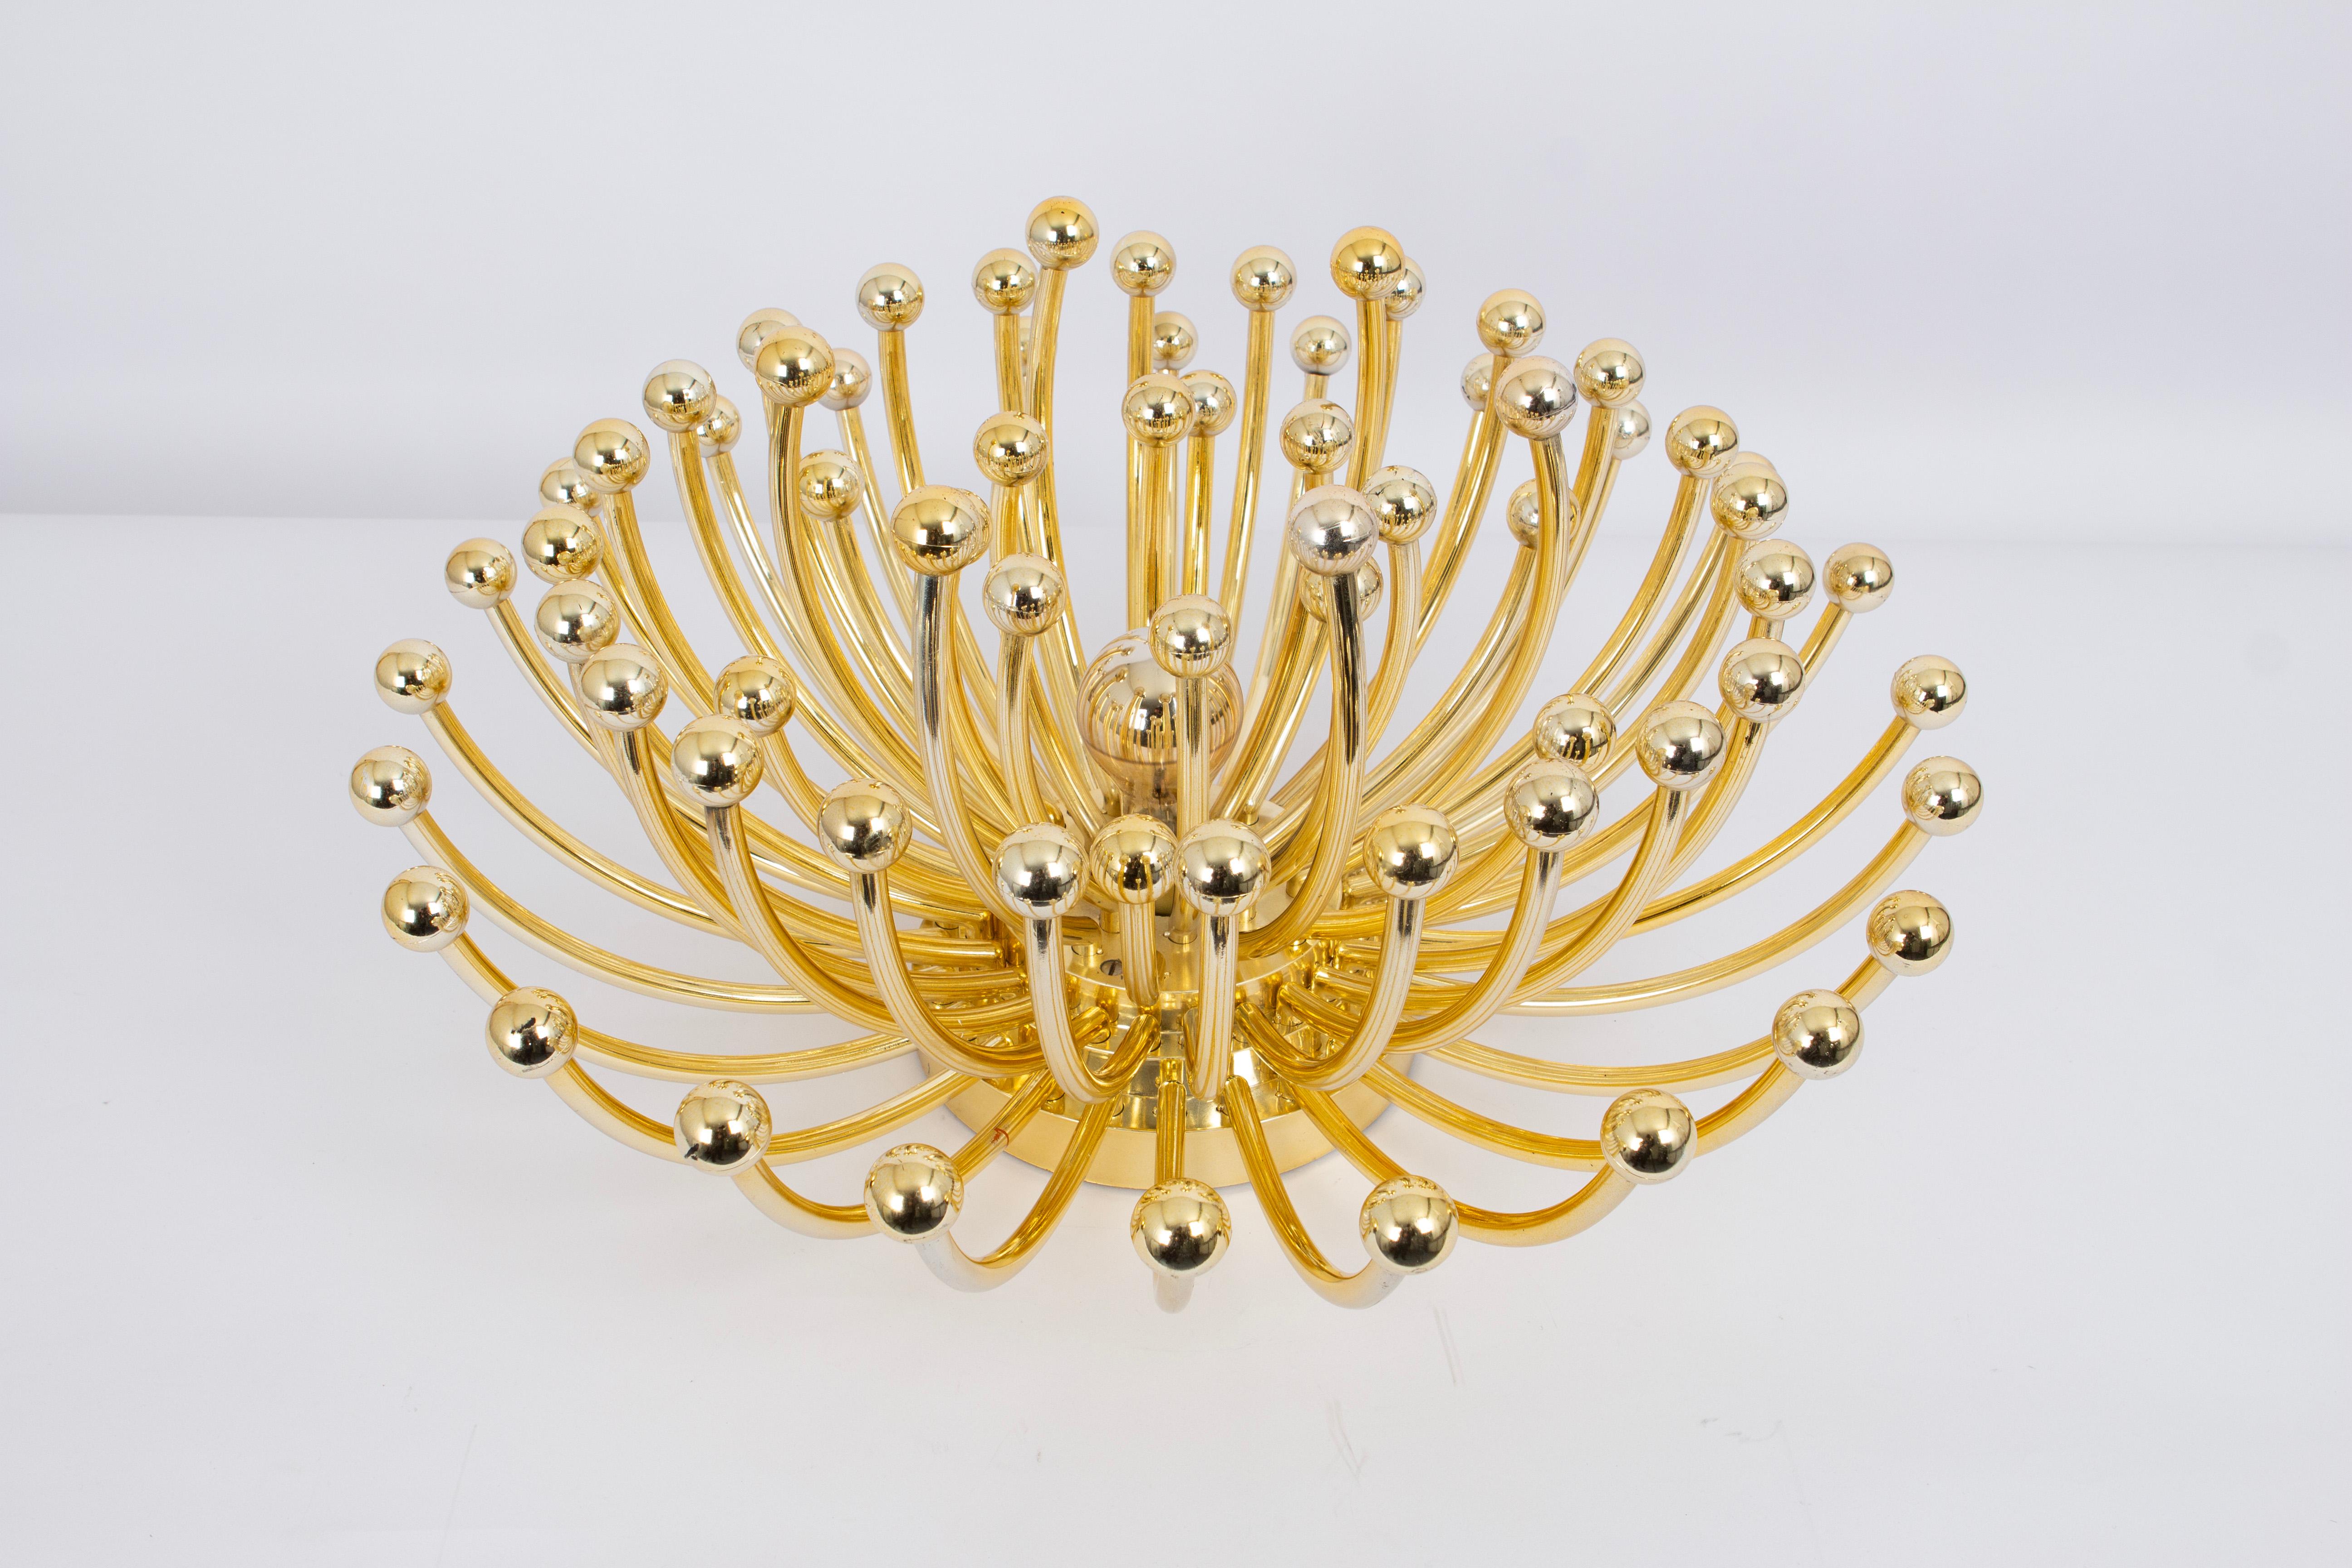 Large Pistillino Ceiling Light by Valenti Luce for Studio Tetrarch, 1970s For Sale 1